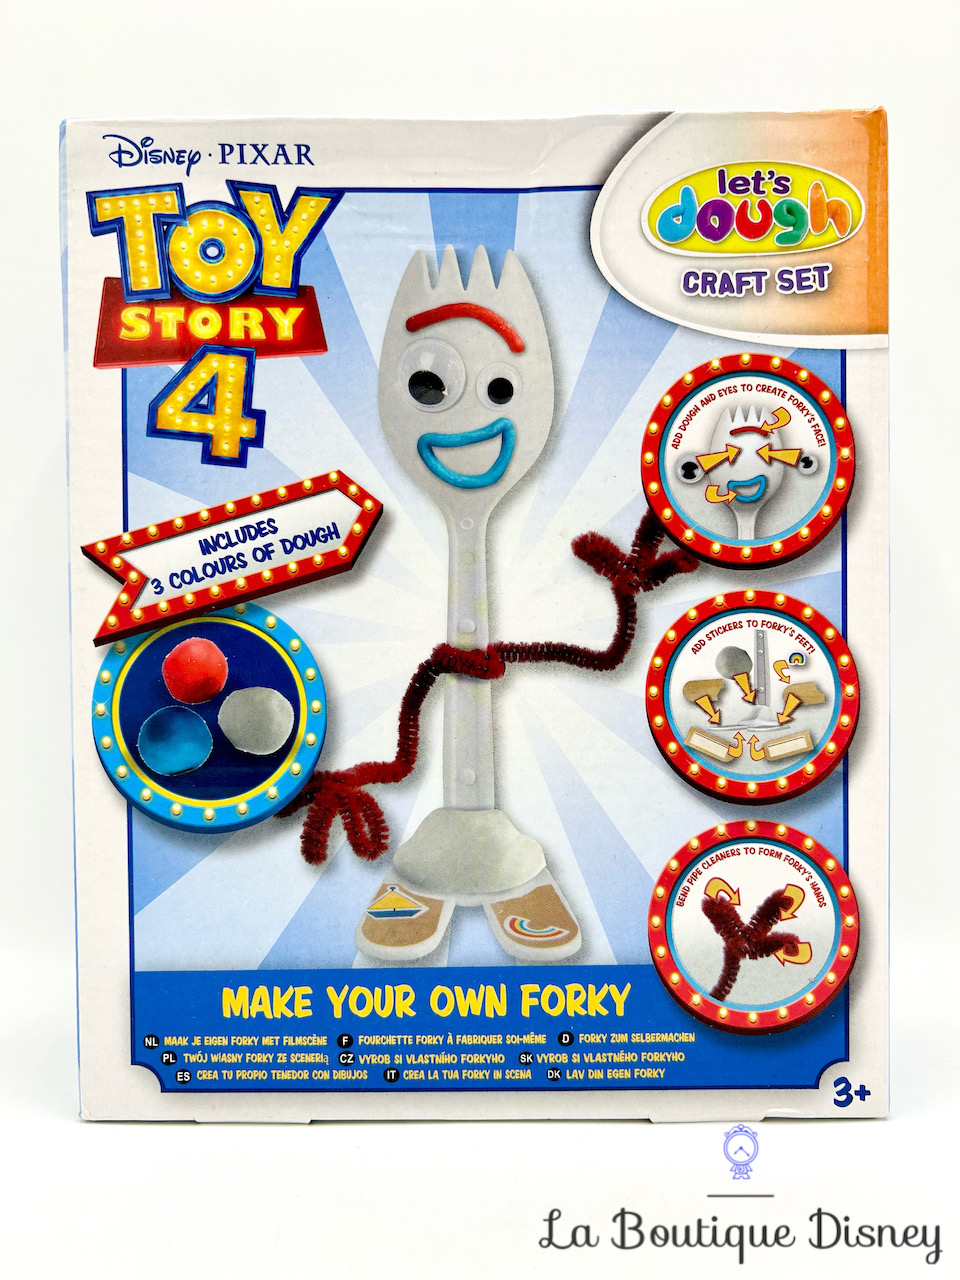 Jouet Fourchette Toy Story 4 Disney Set Let\'s Dough Craft Set Make your own Forky